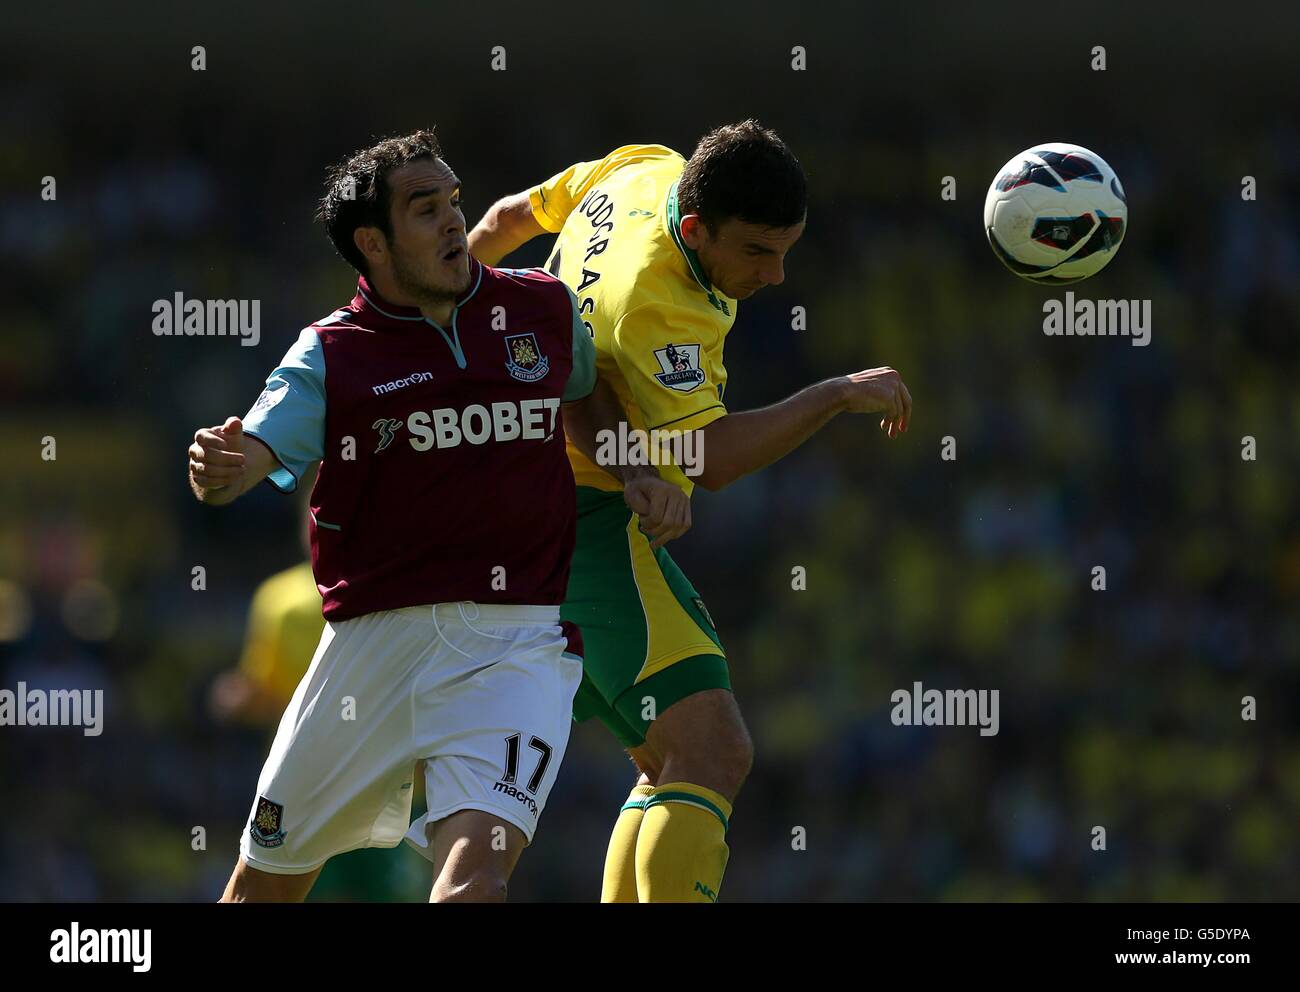 Norwich City's Robert Snodgrass (right) and West Ham United's Joey O'Brien (left) battle for the ball in the air Stock Photo